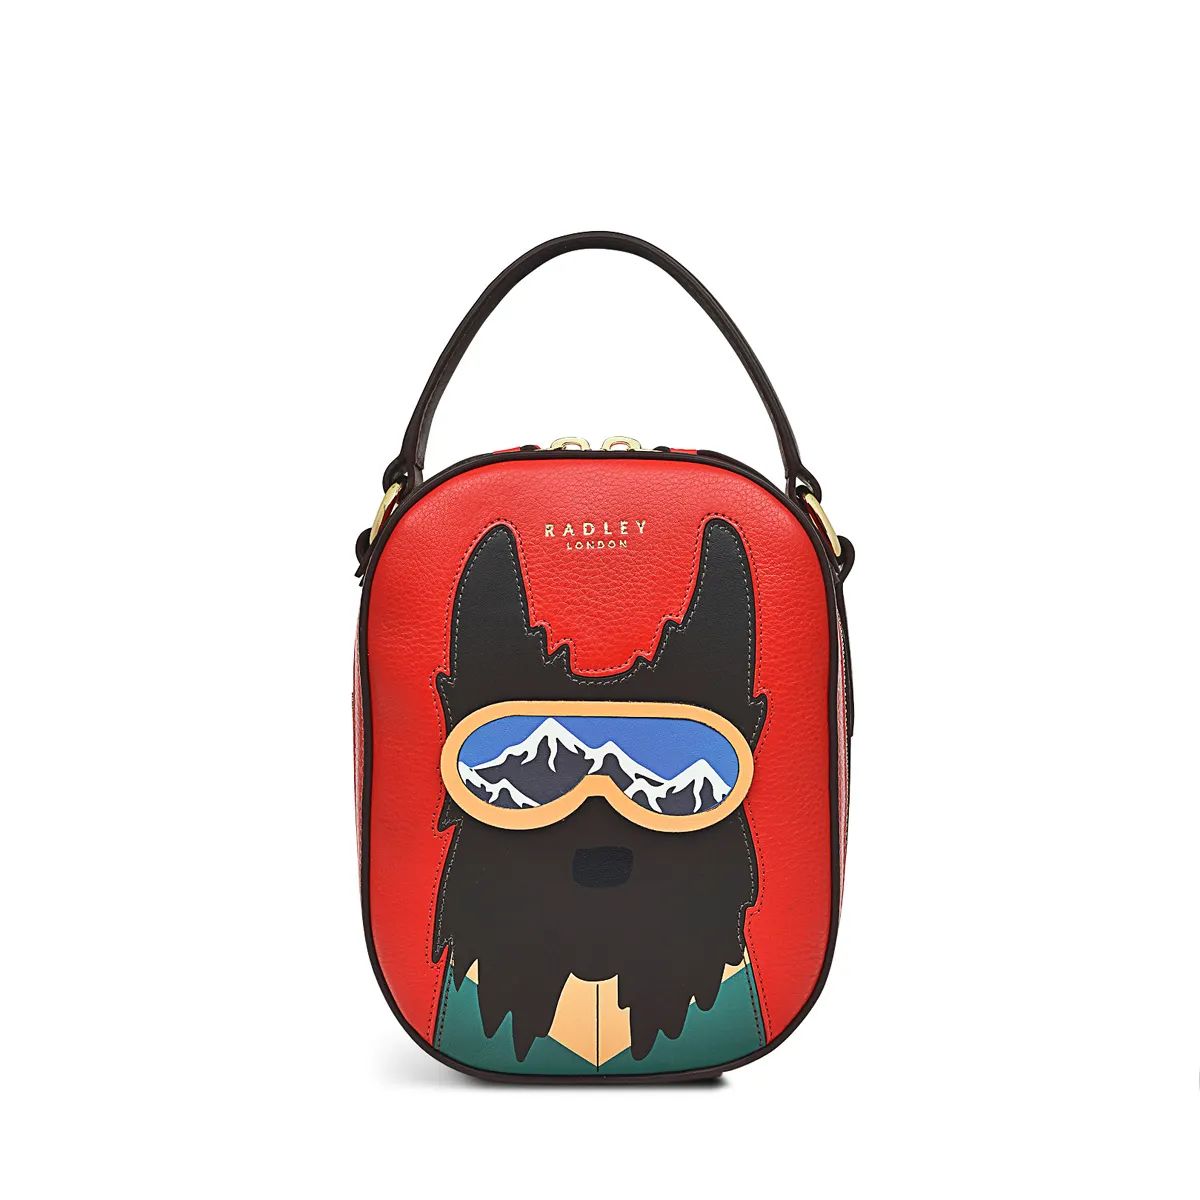 Product page | Radley London US